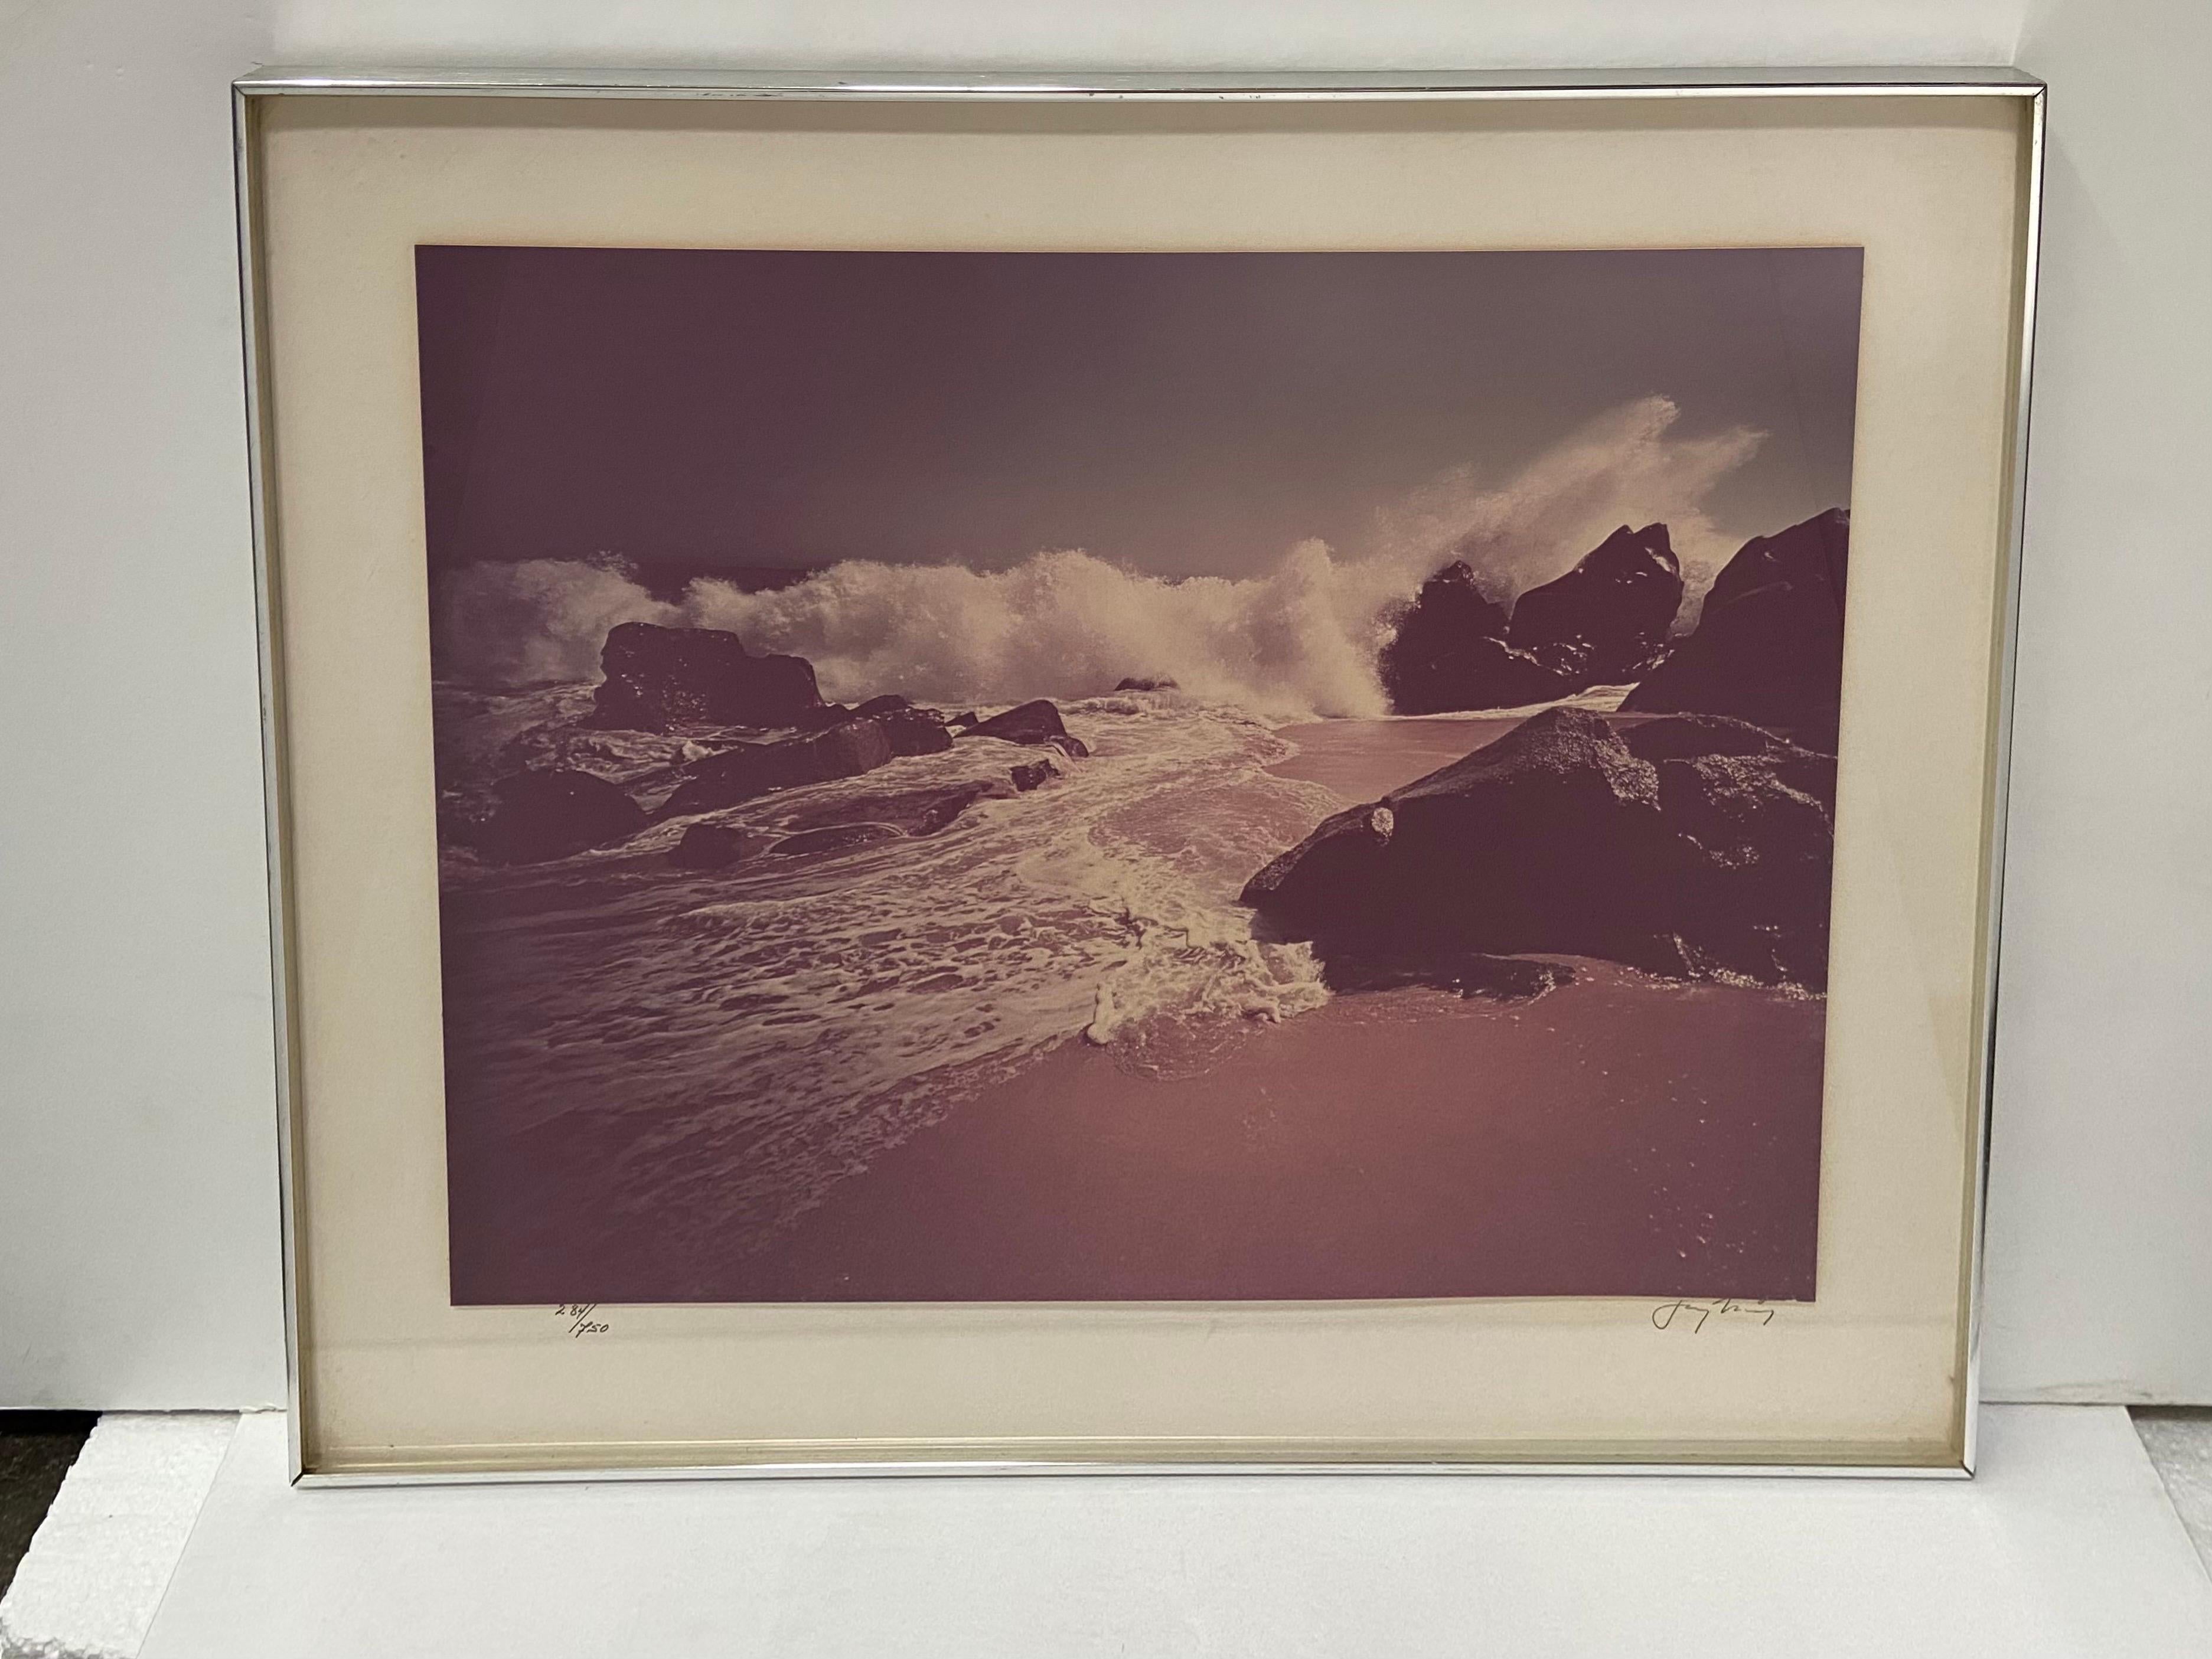 A vintage circa 1970s beach scene photograph by New York City photographer Jay Maisel (Born 1931). This photograph has a period frame dating to the 1970s and retains the original information verso. This work is signed in the lower right corner of